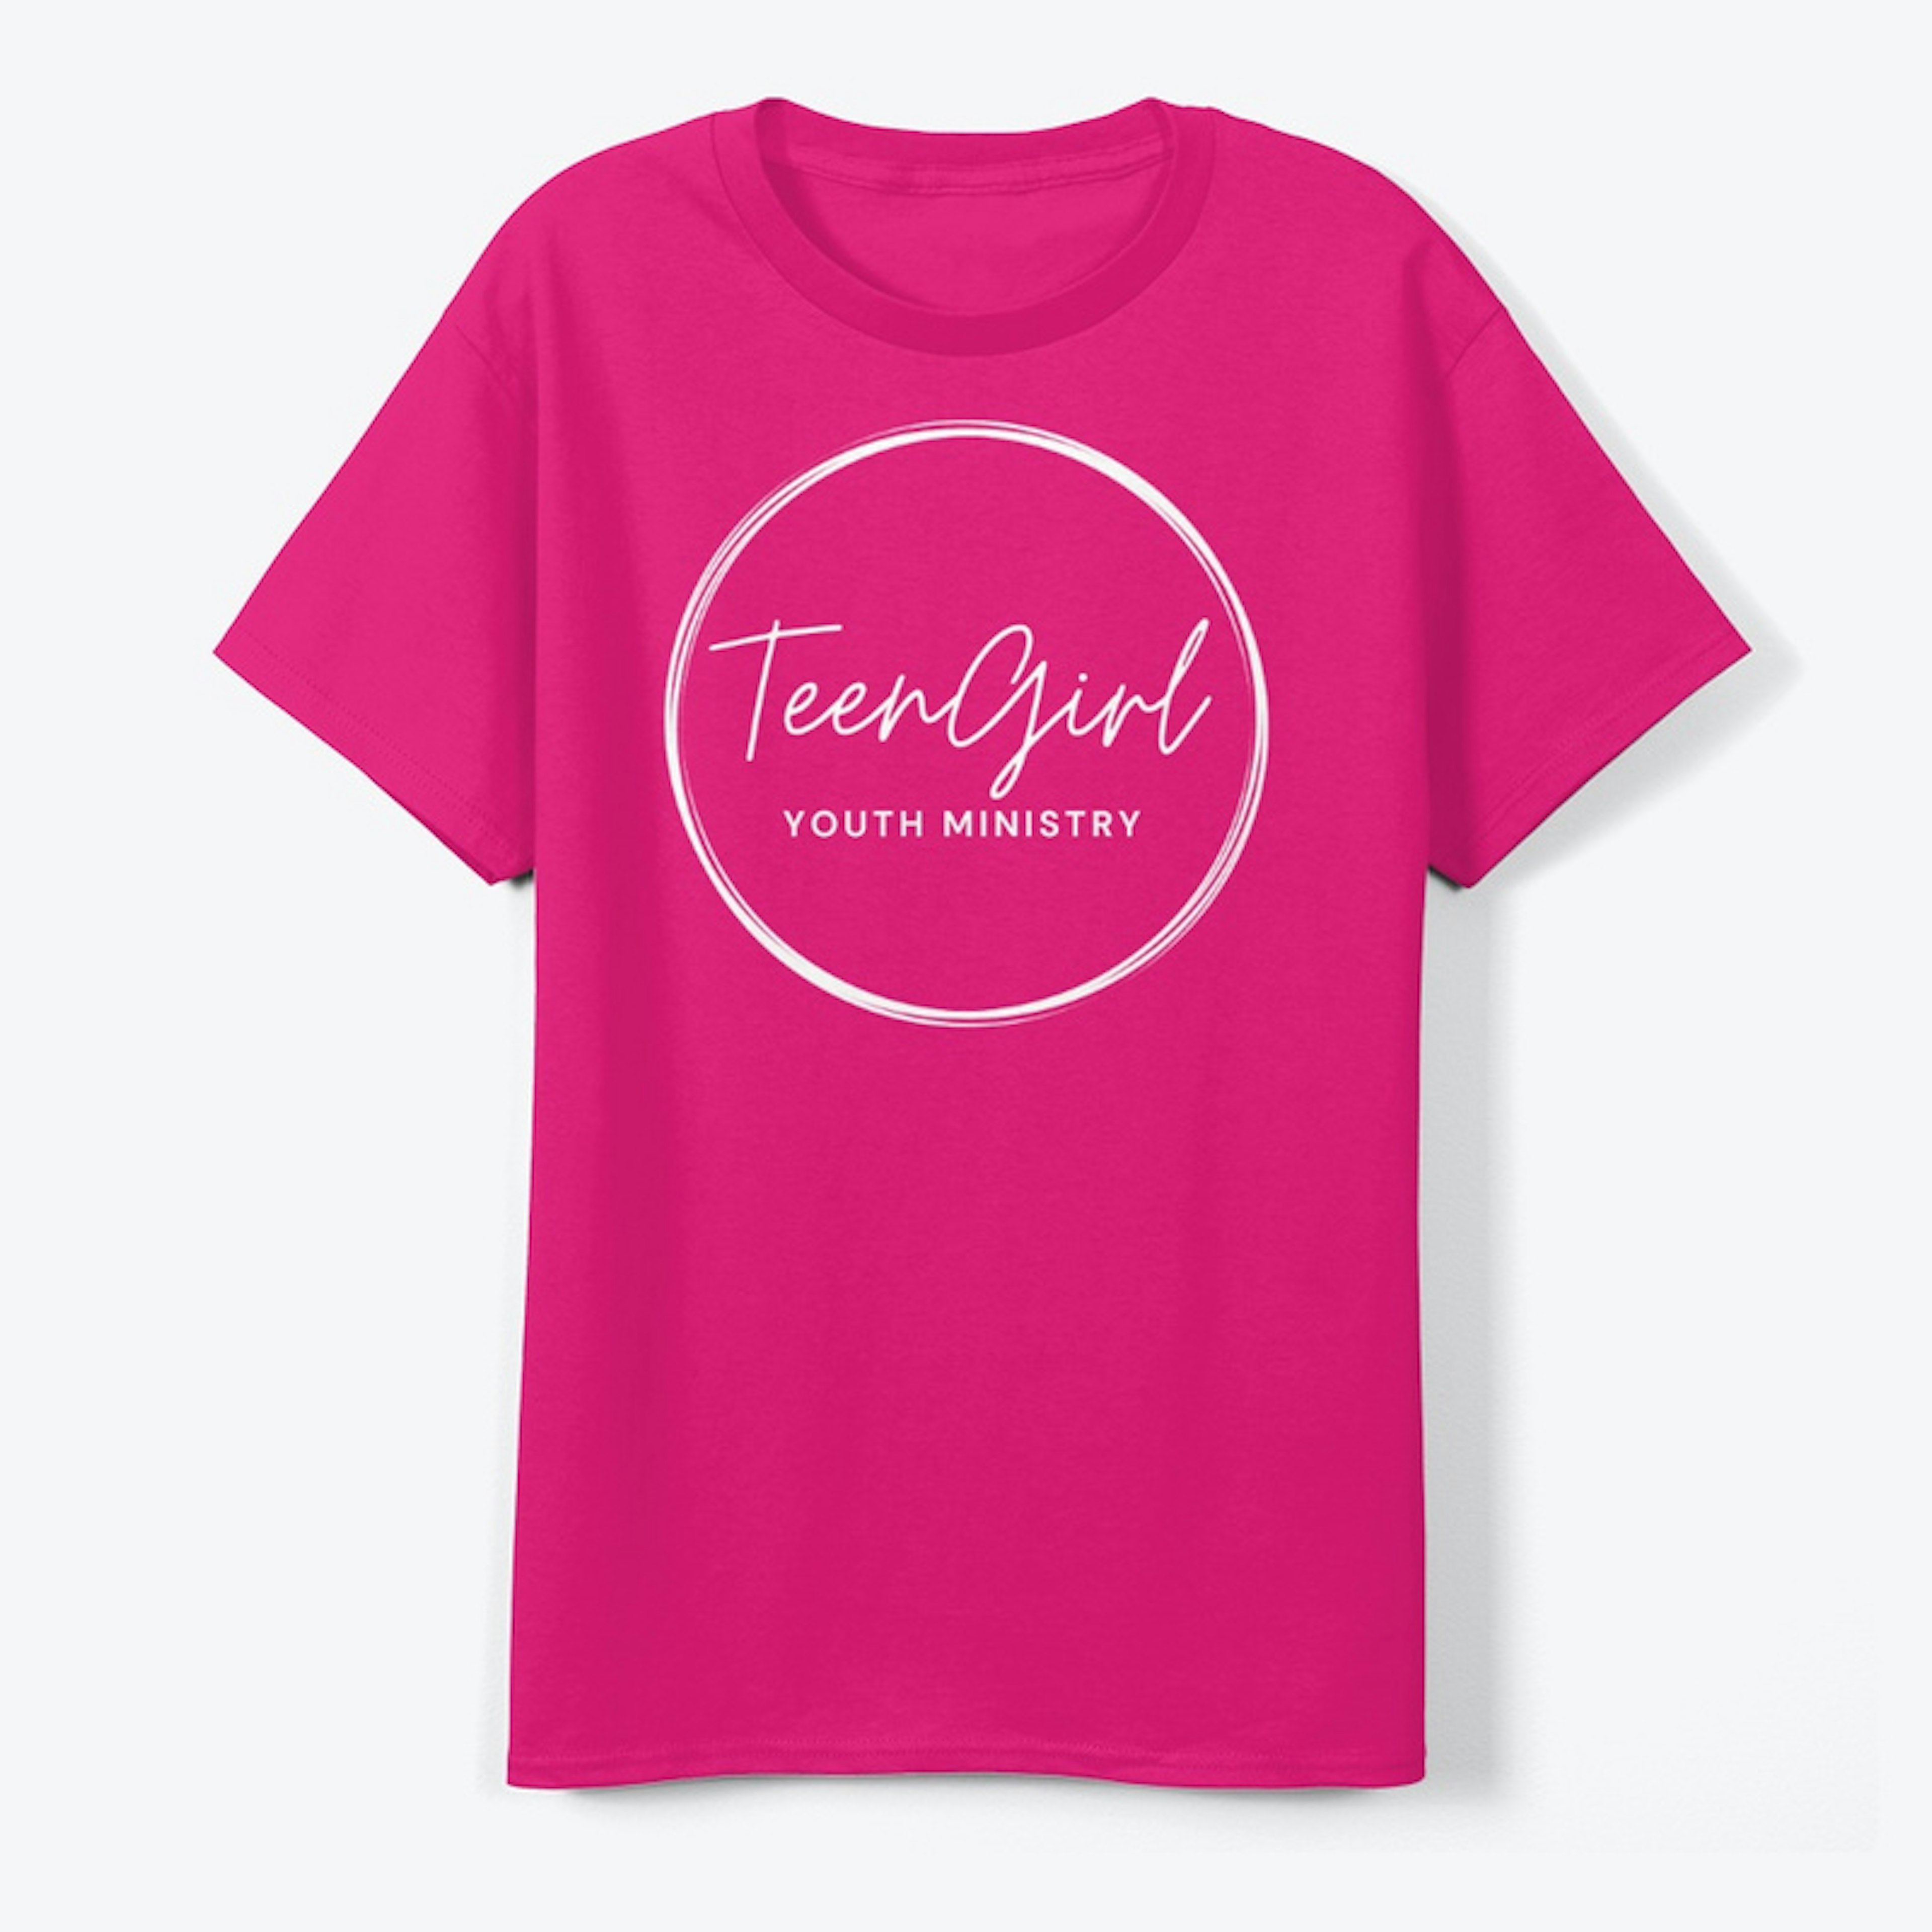 Teen Girl Youth Ministry Collection